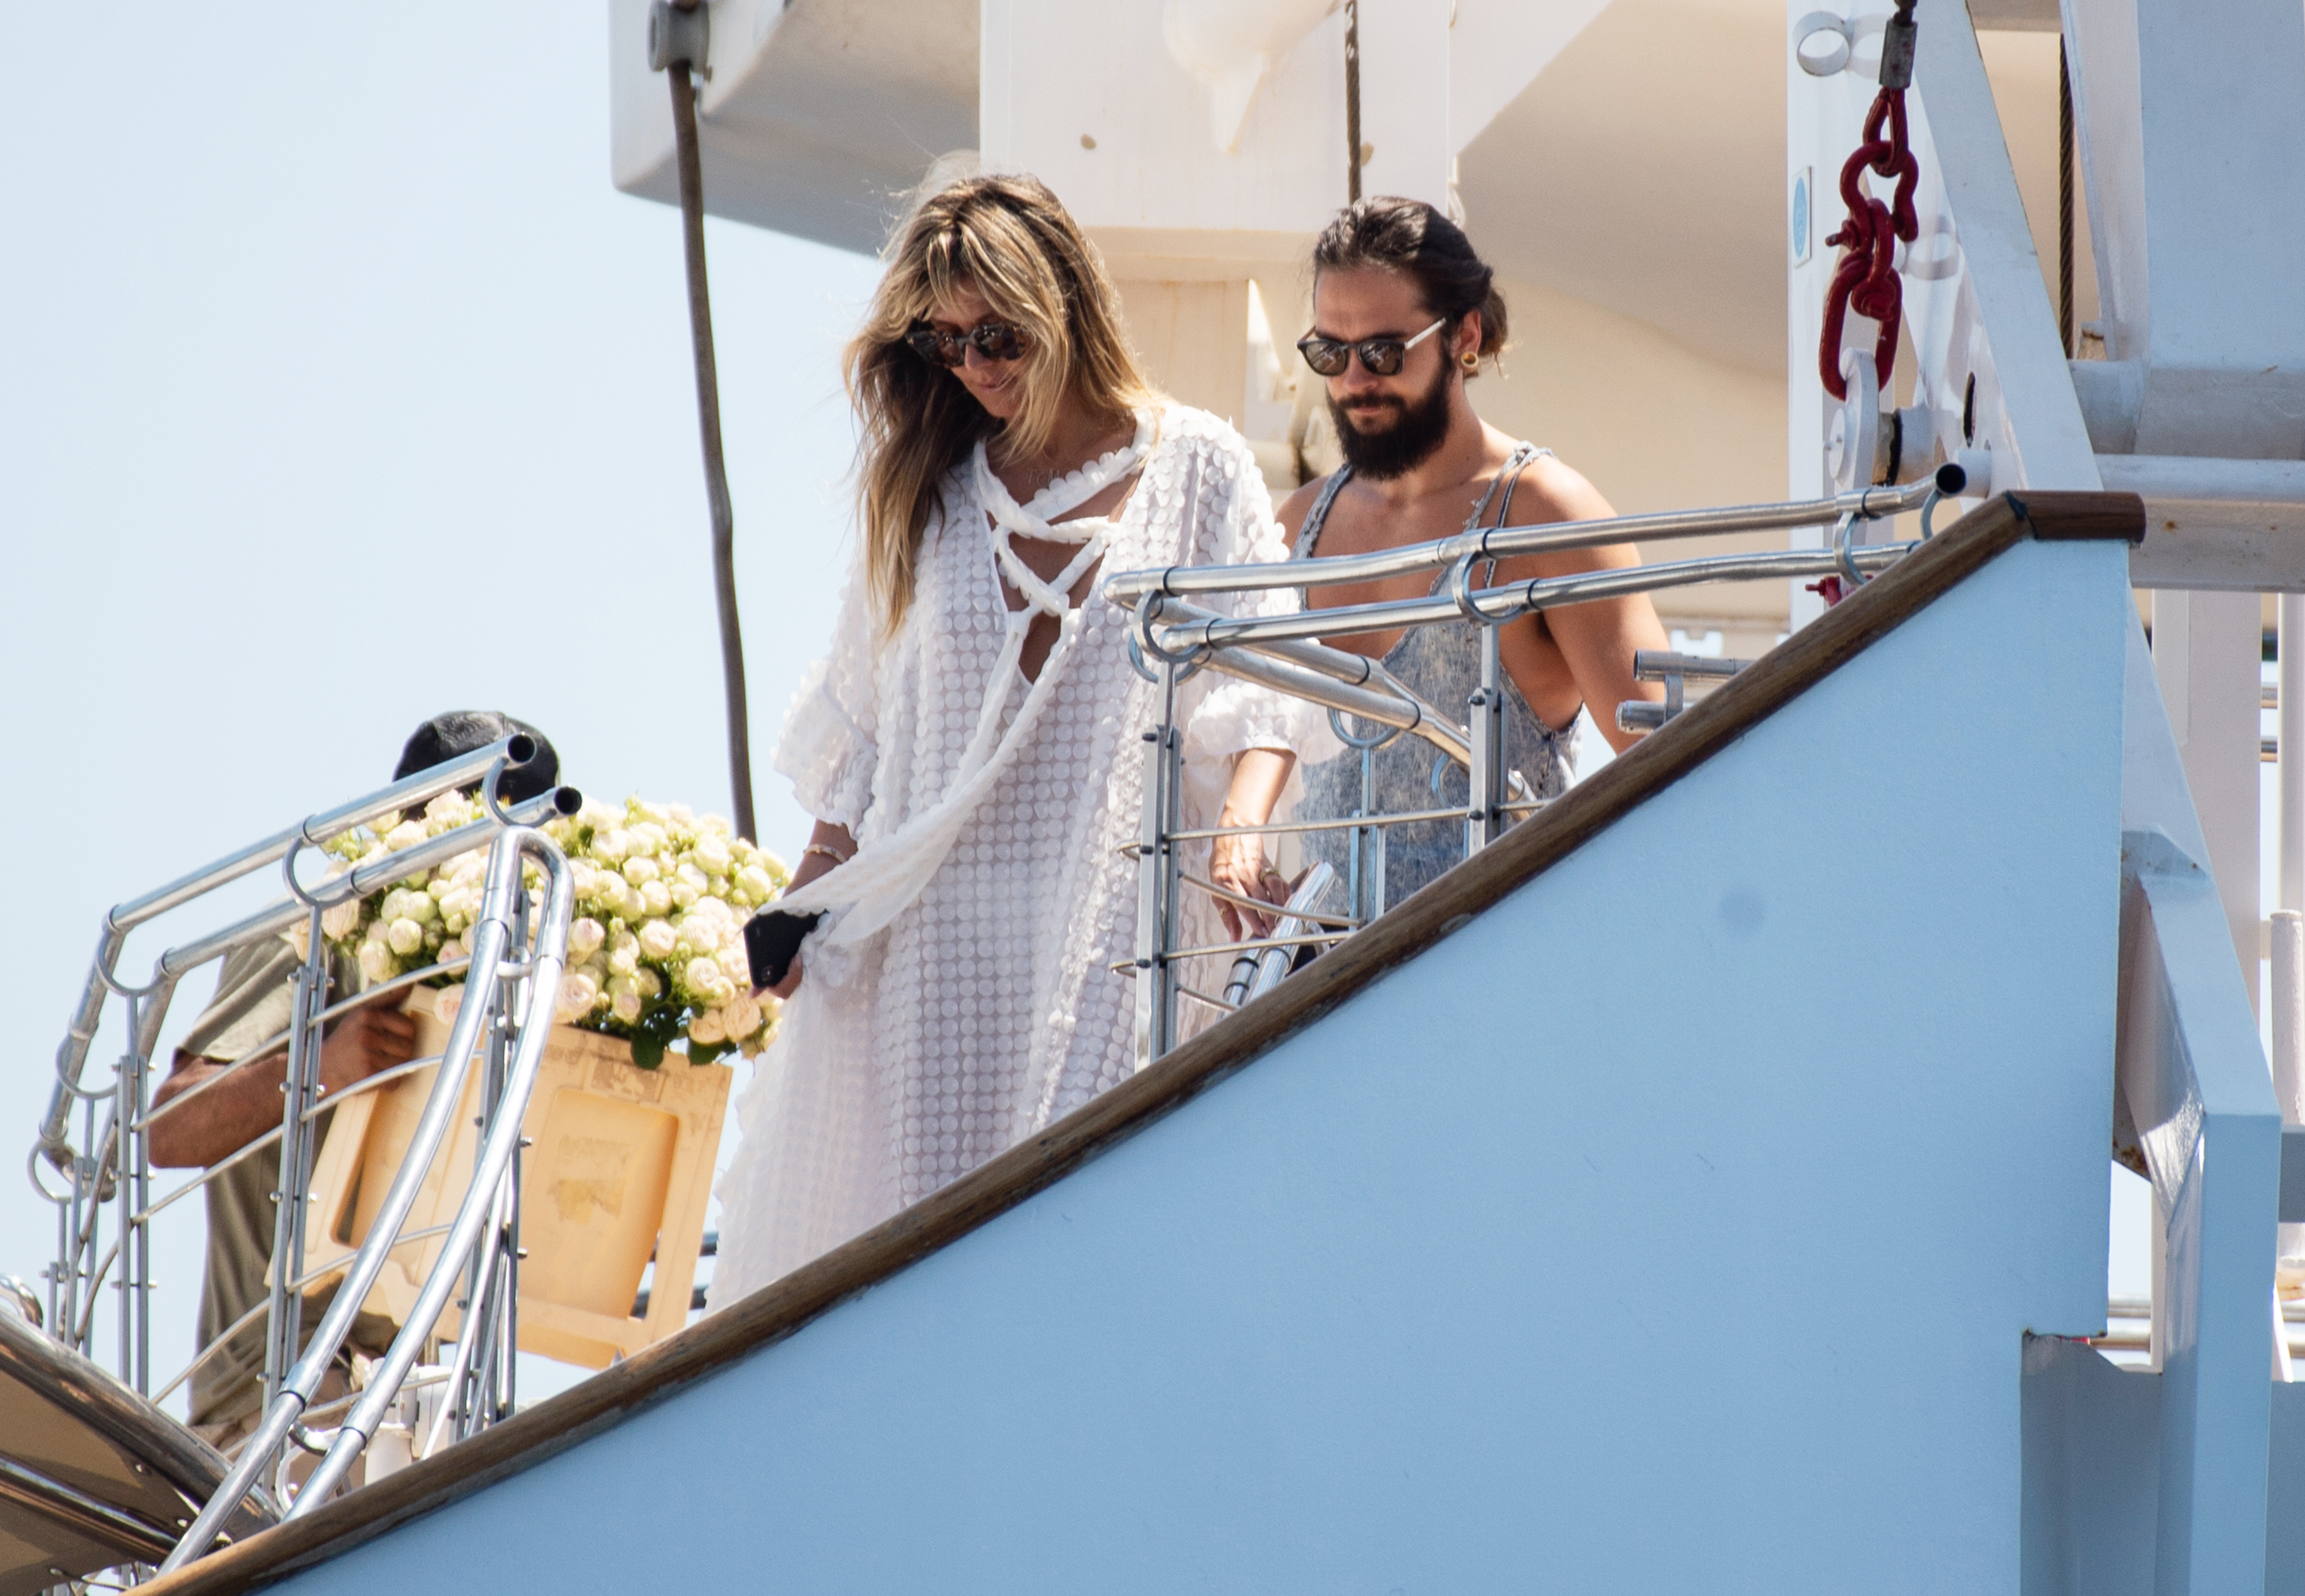 Heidi Klum and Tom Kaulitz on their wedding day in Capri, Italy on August 3, 2019 | Source: Getty Images